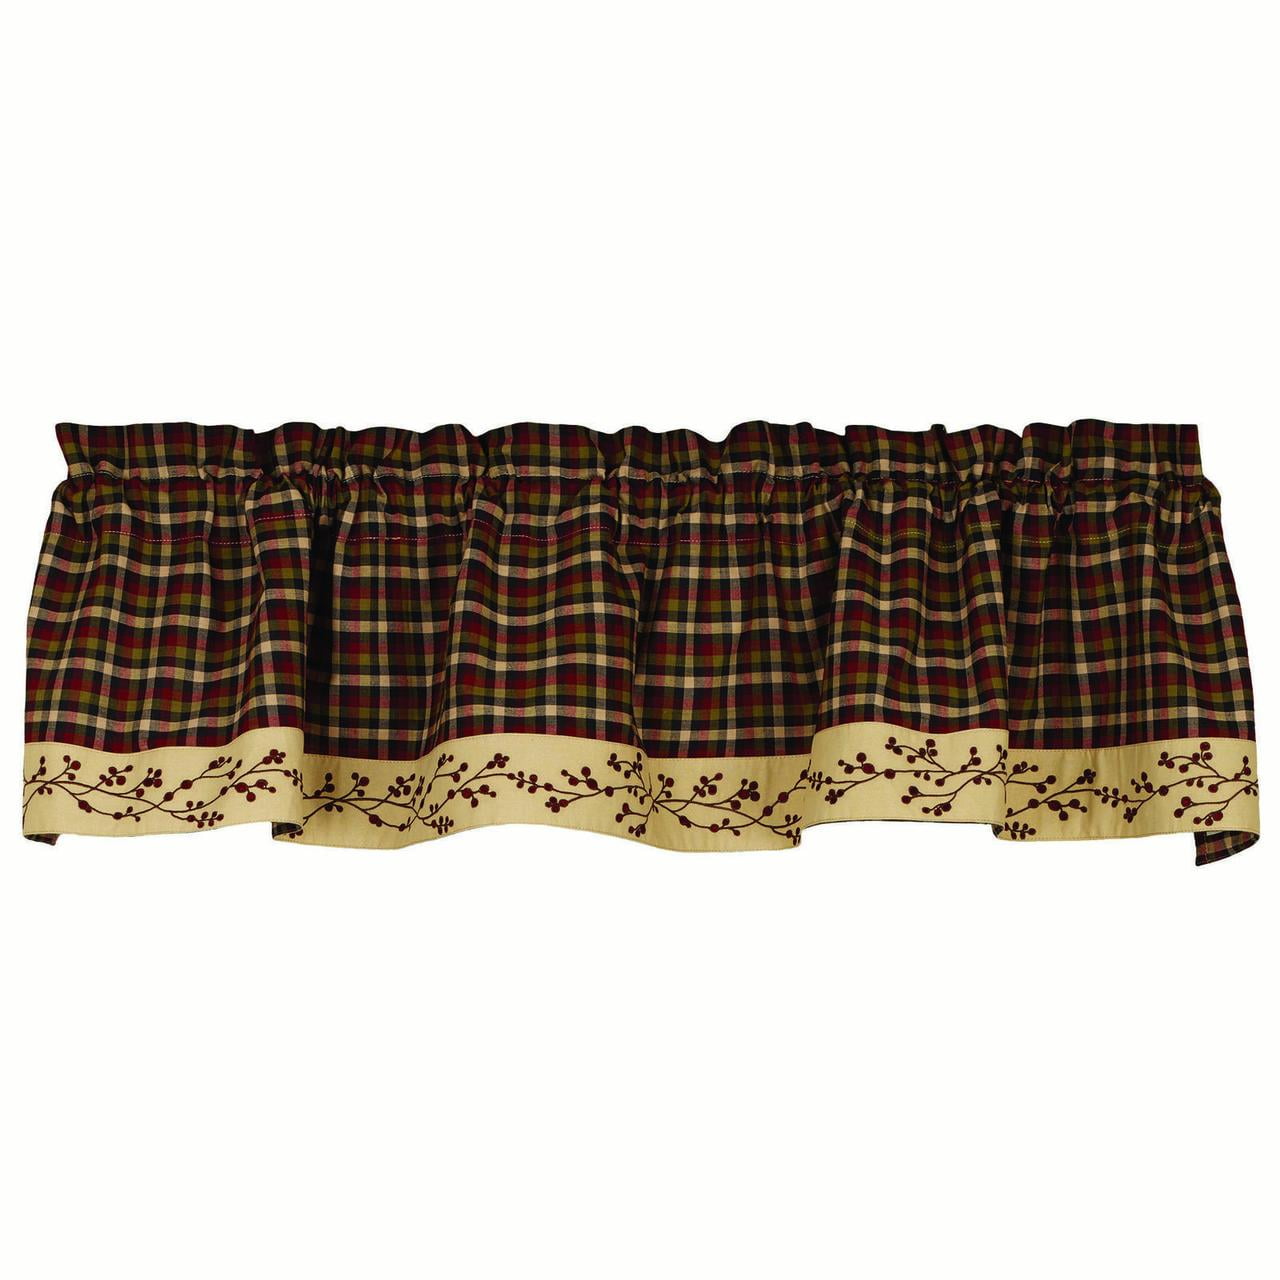 Brandywine Valance 72" x 14" Sage Green Checked Farmhouse Country Burgundy Red 